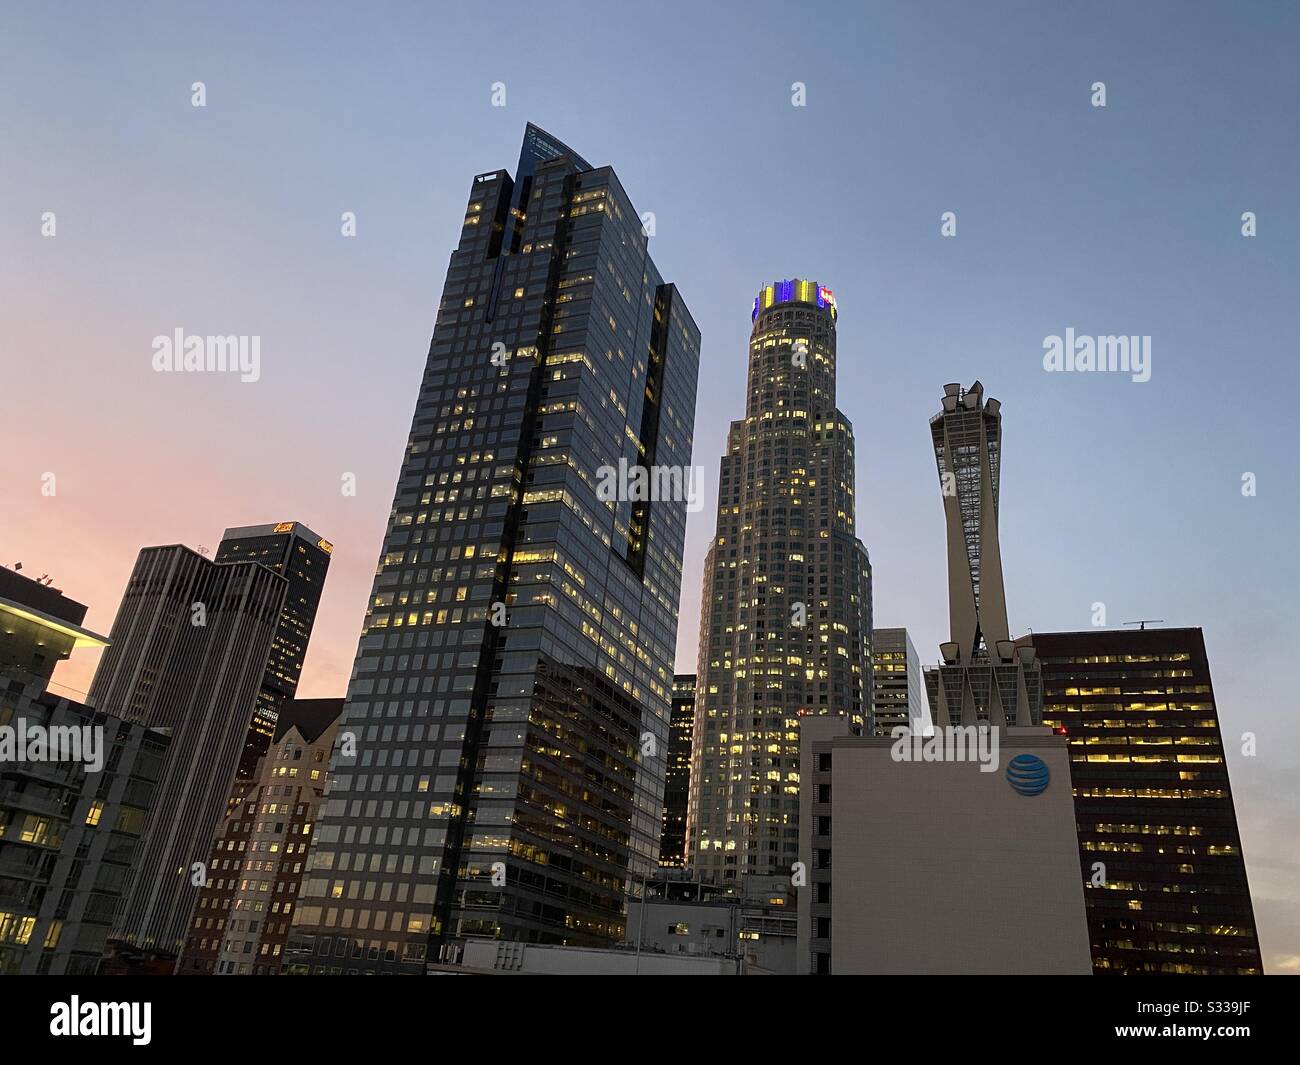 LOS ANGELES, CA, JAN 2020: Downtown skyscrapers at dusk with lights on top of US Bank Tower showing purple and yellow, LA Lakers basketball team colors in memory of player Kobe Bryant Stock Photo